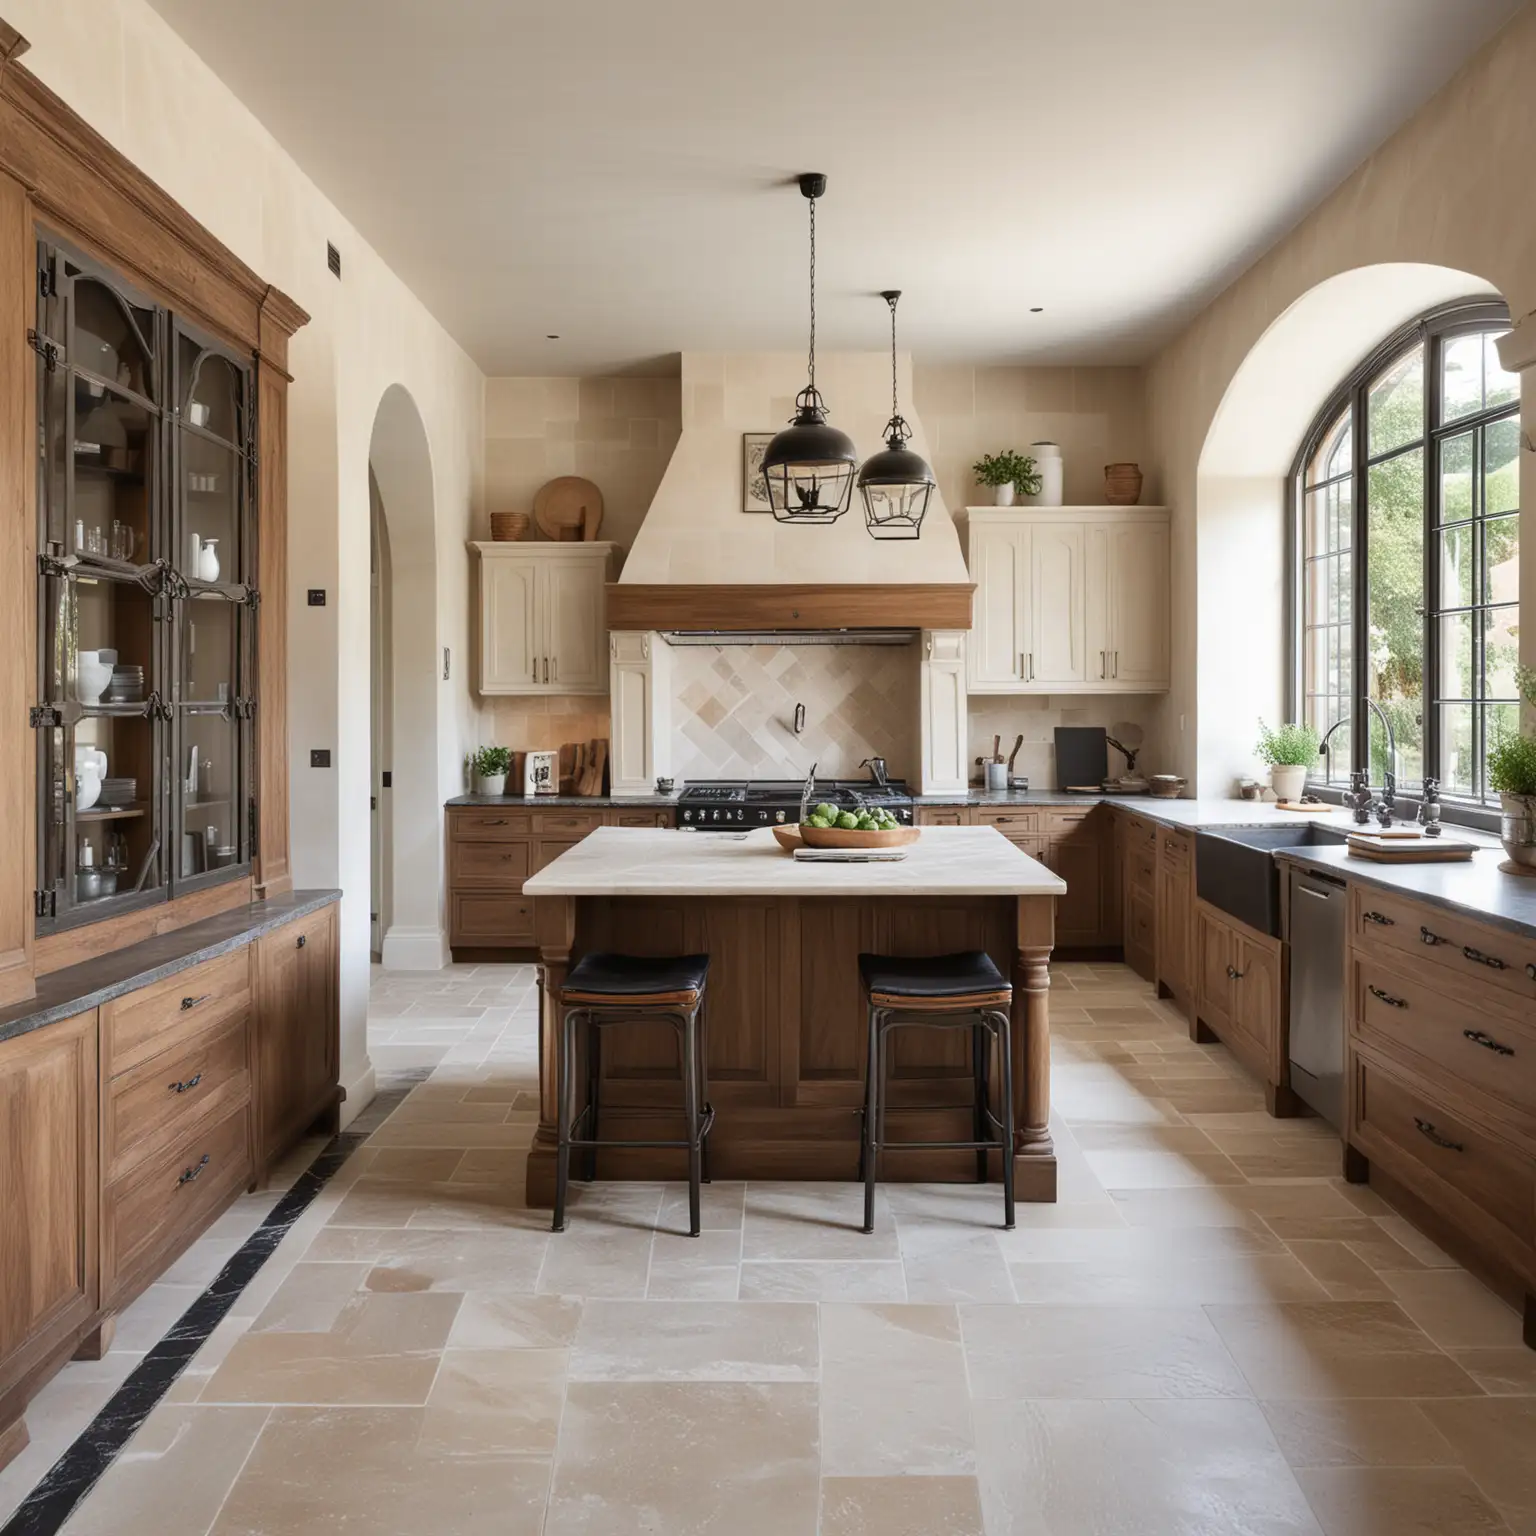 Luxurious Modern French Chateau Kitchen with Limewash Walls and Walnut Accents